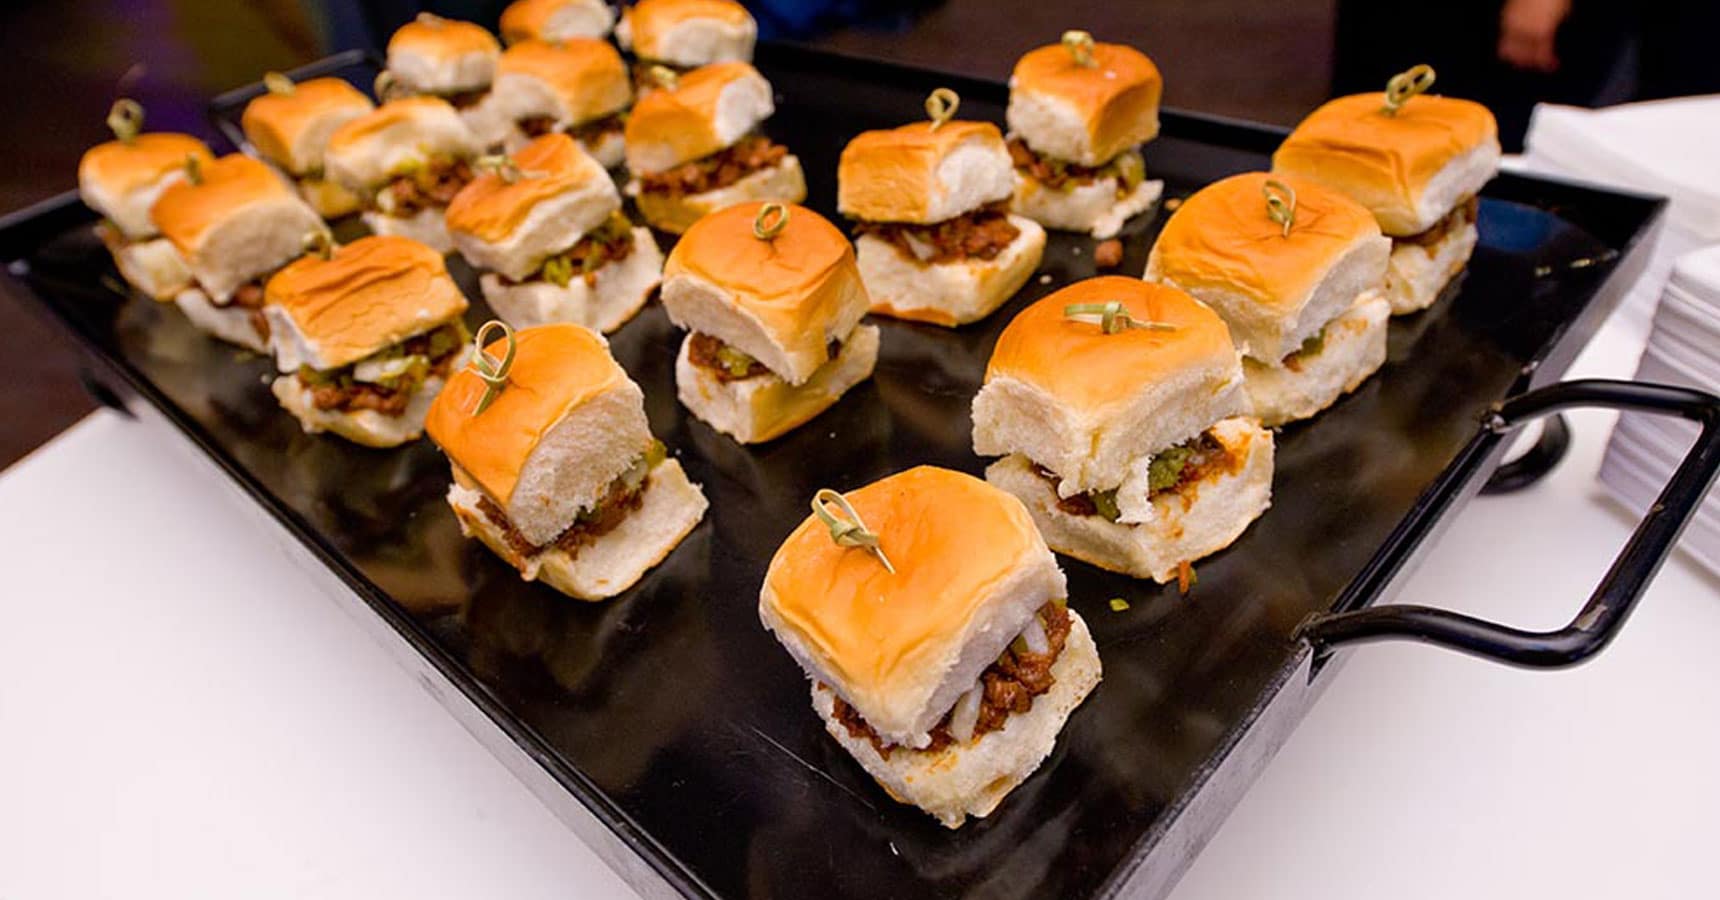 BBQ Beef sliders by Crave Catering